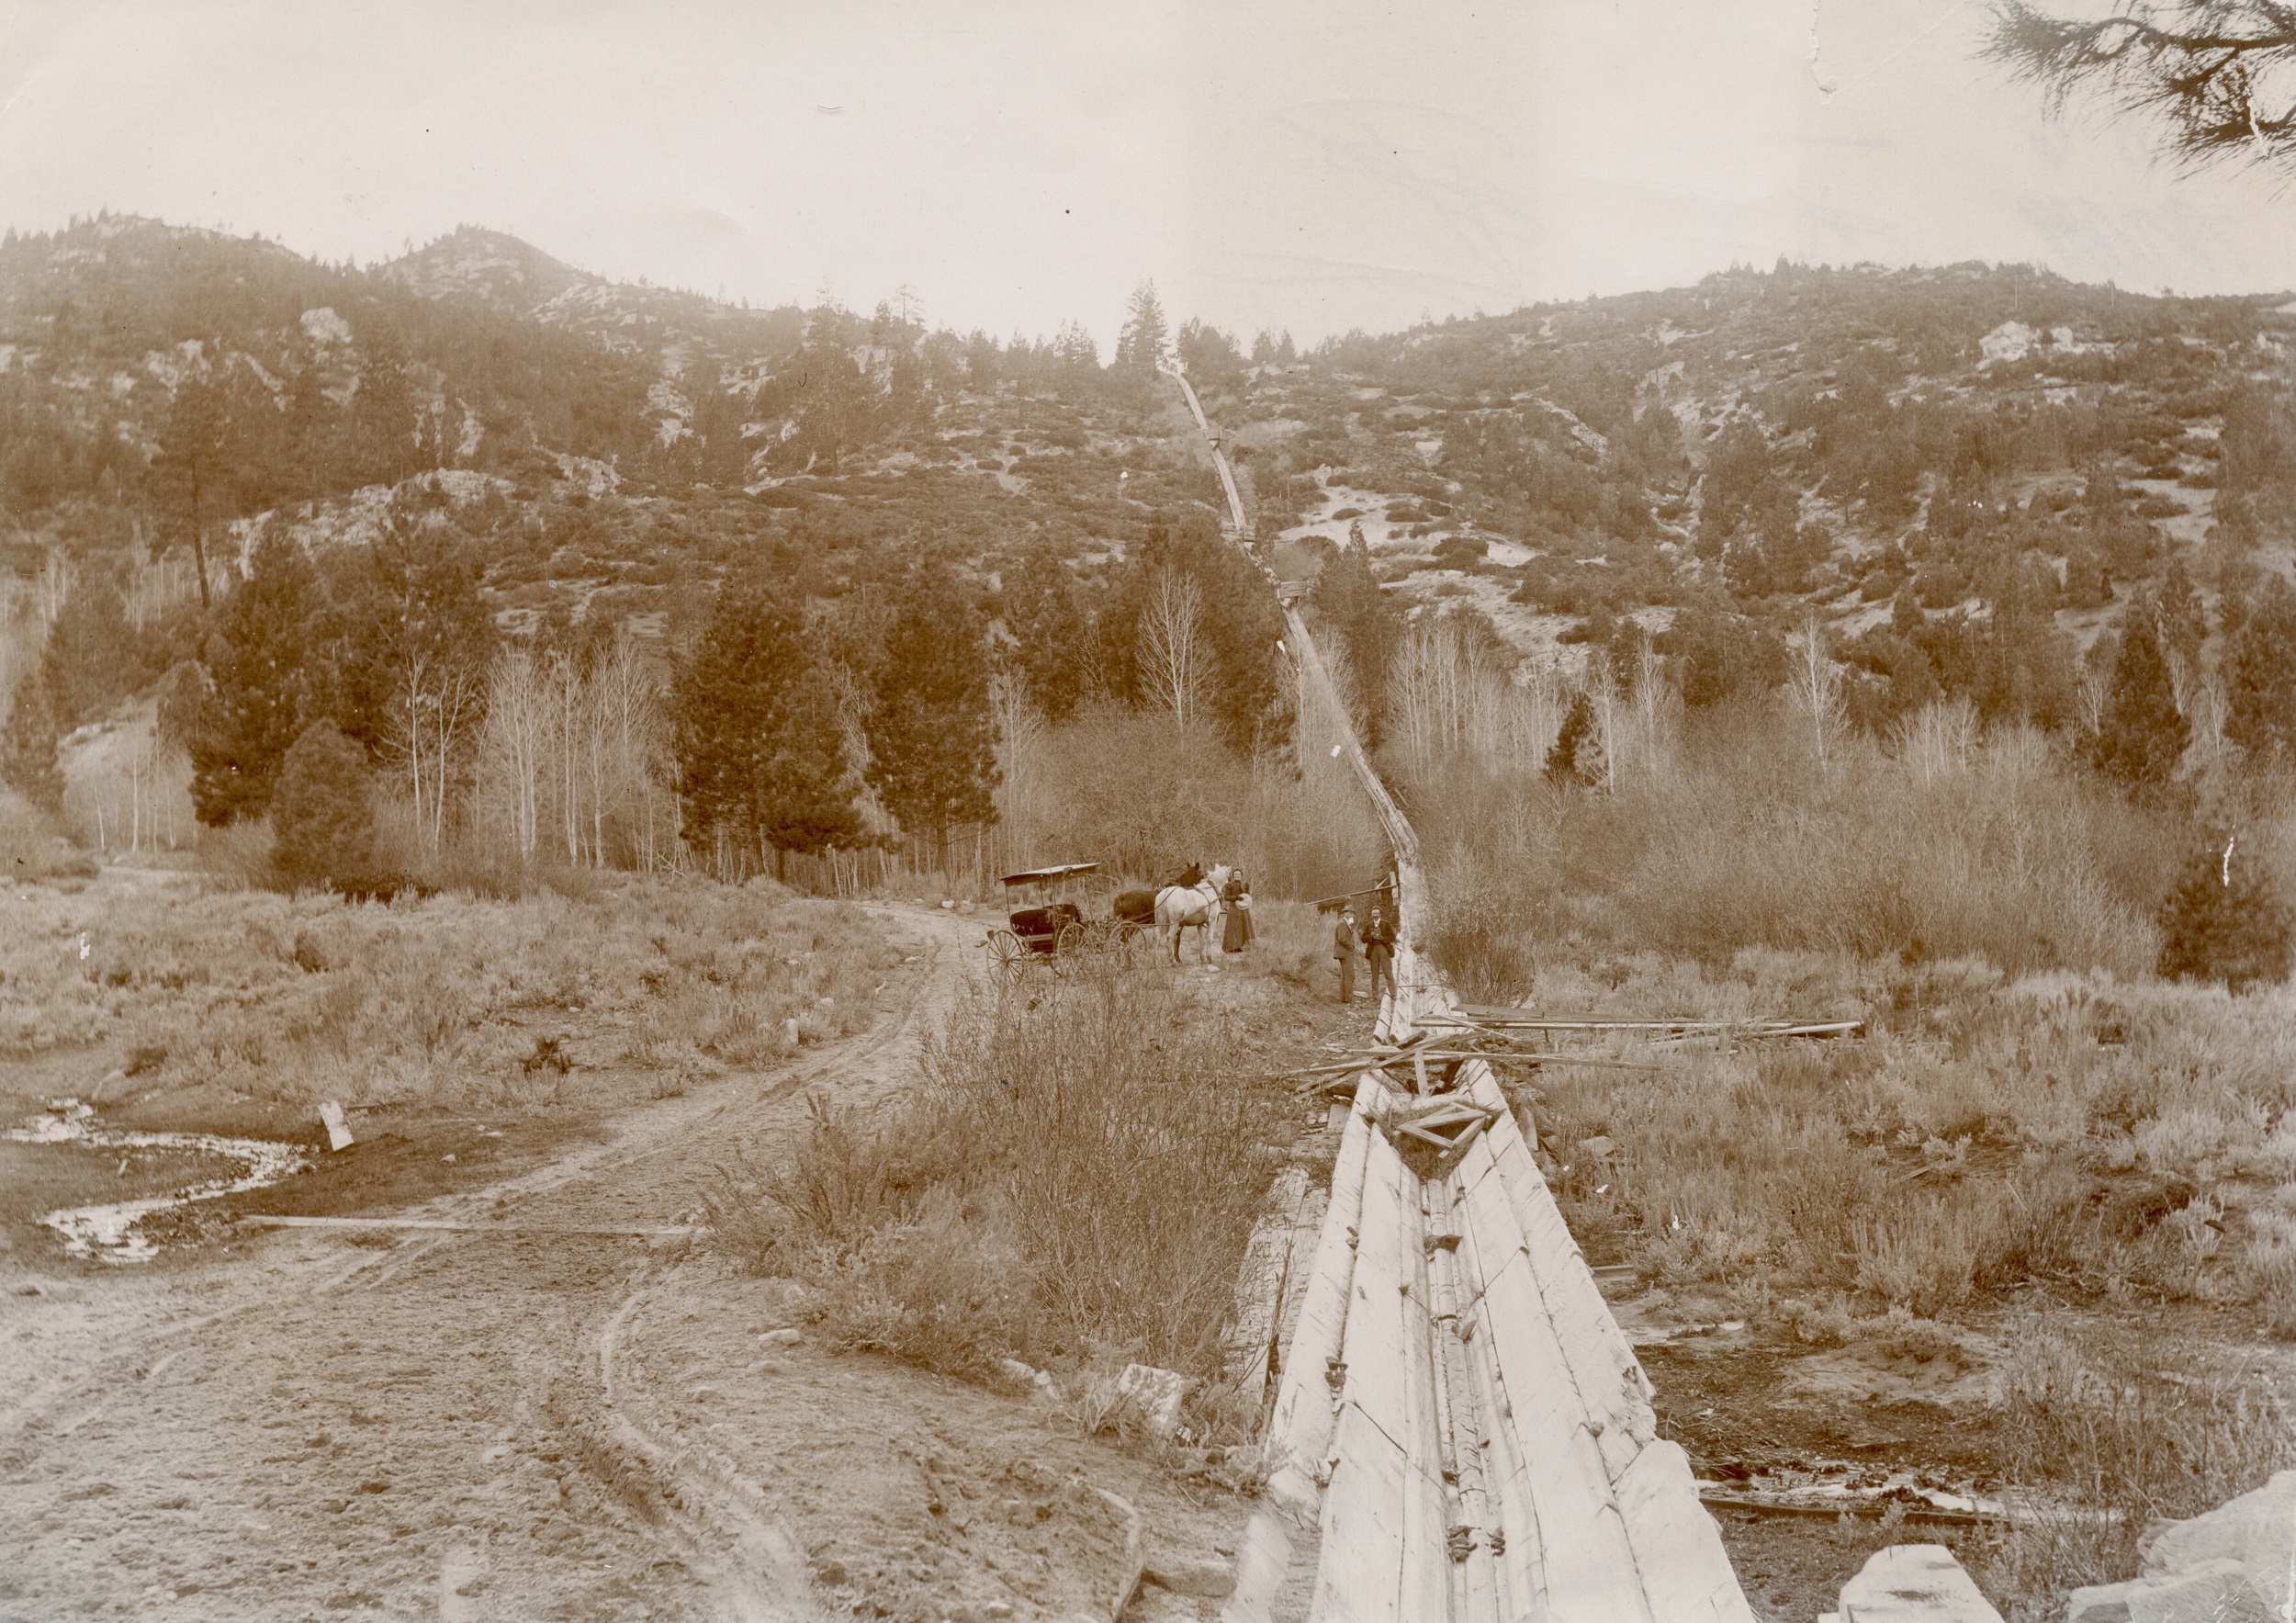 Sepia-toned photograph of a wooded hilly landscape with a wooden chute extending from foreground to background.